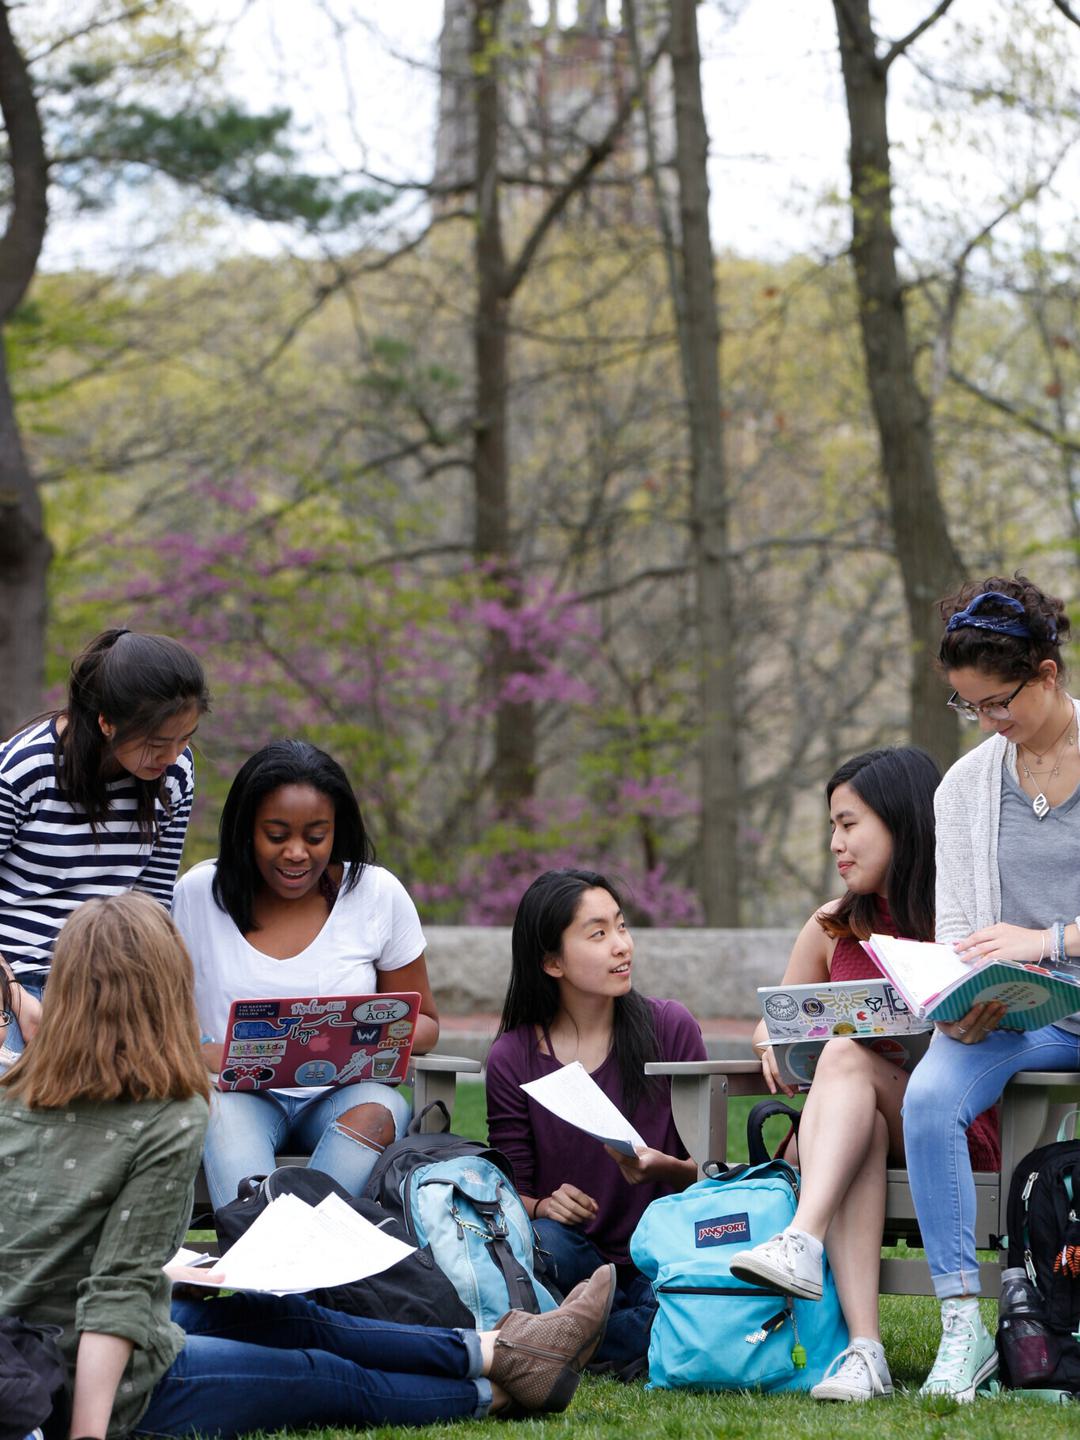 A group of six students sitting on the grass with books and computers with the Wellesley tower in the background.